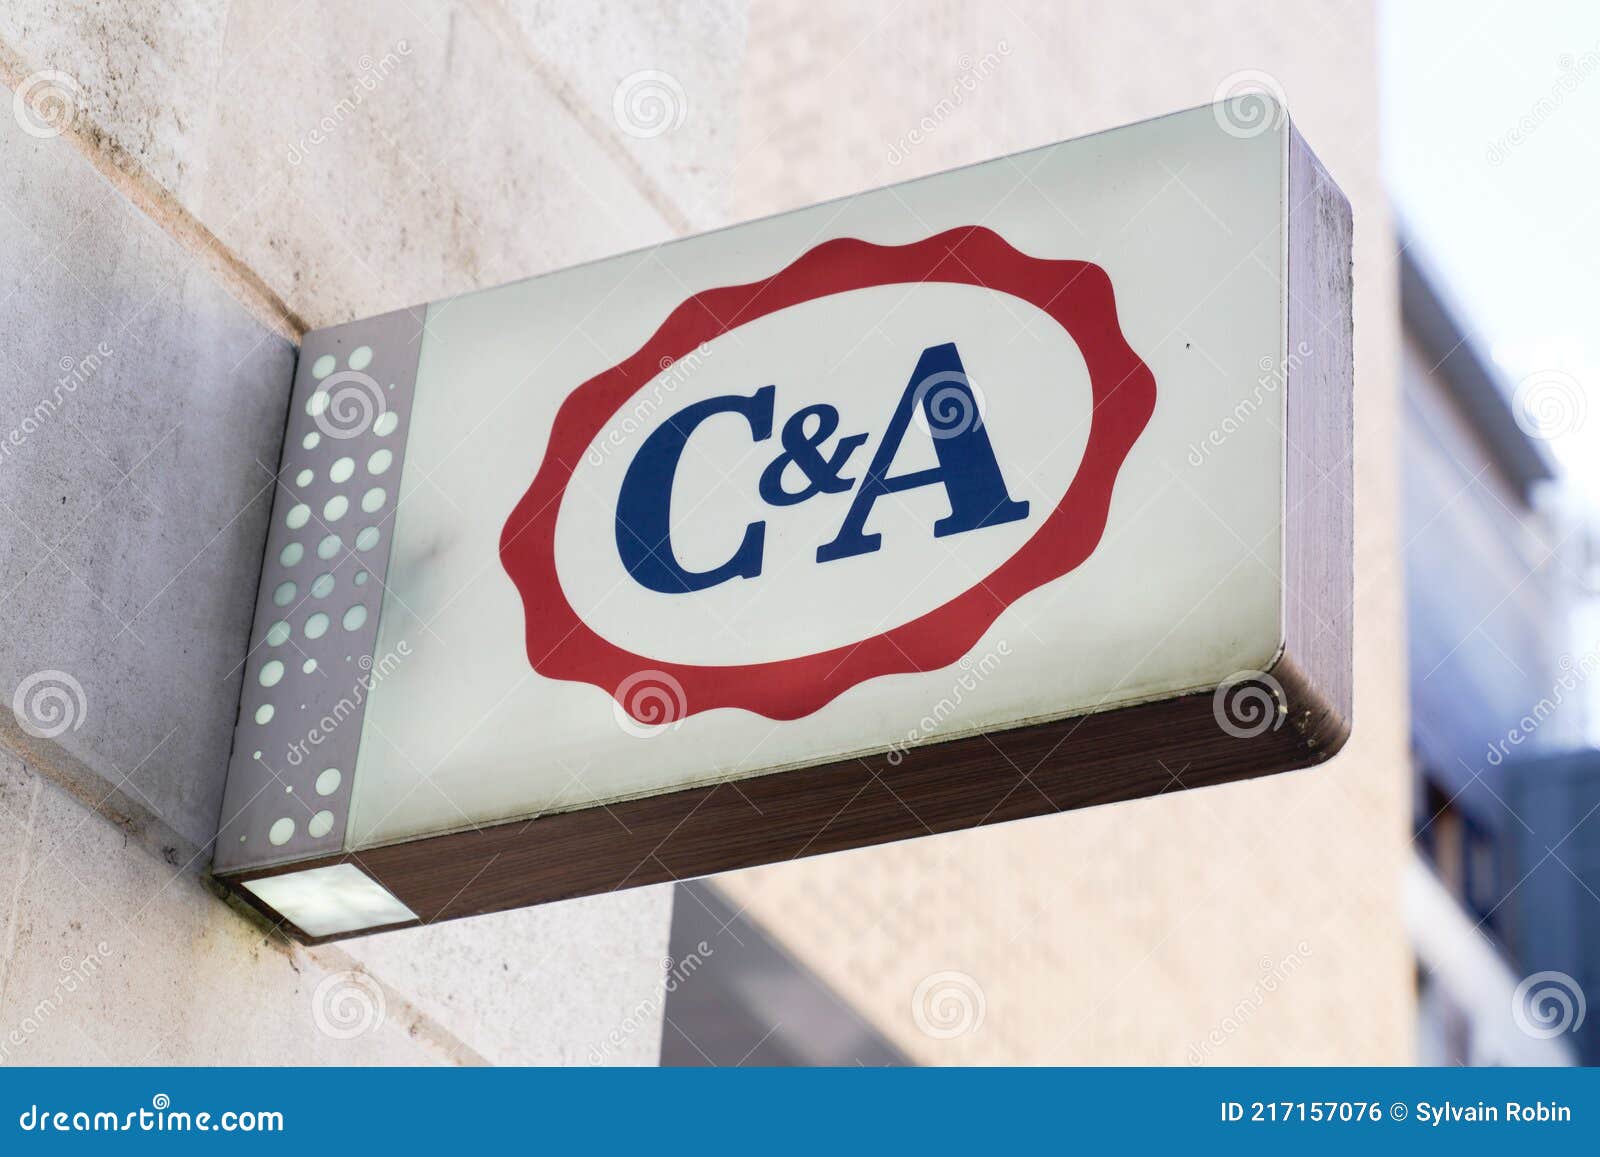 C&a Logo Brand and Text Sign Shop Chain of Clothing Store Fashion ...